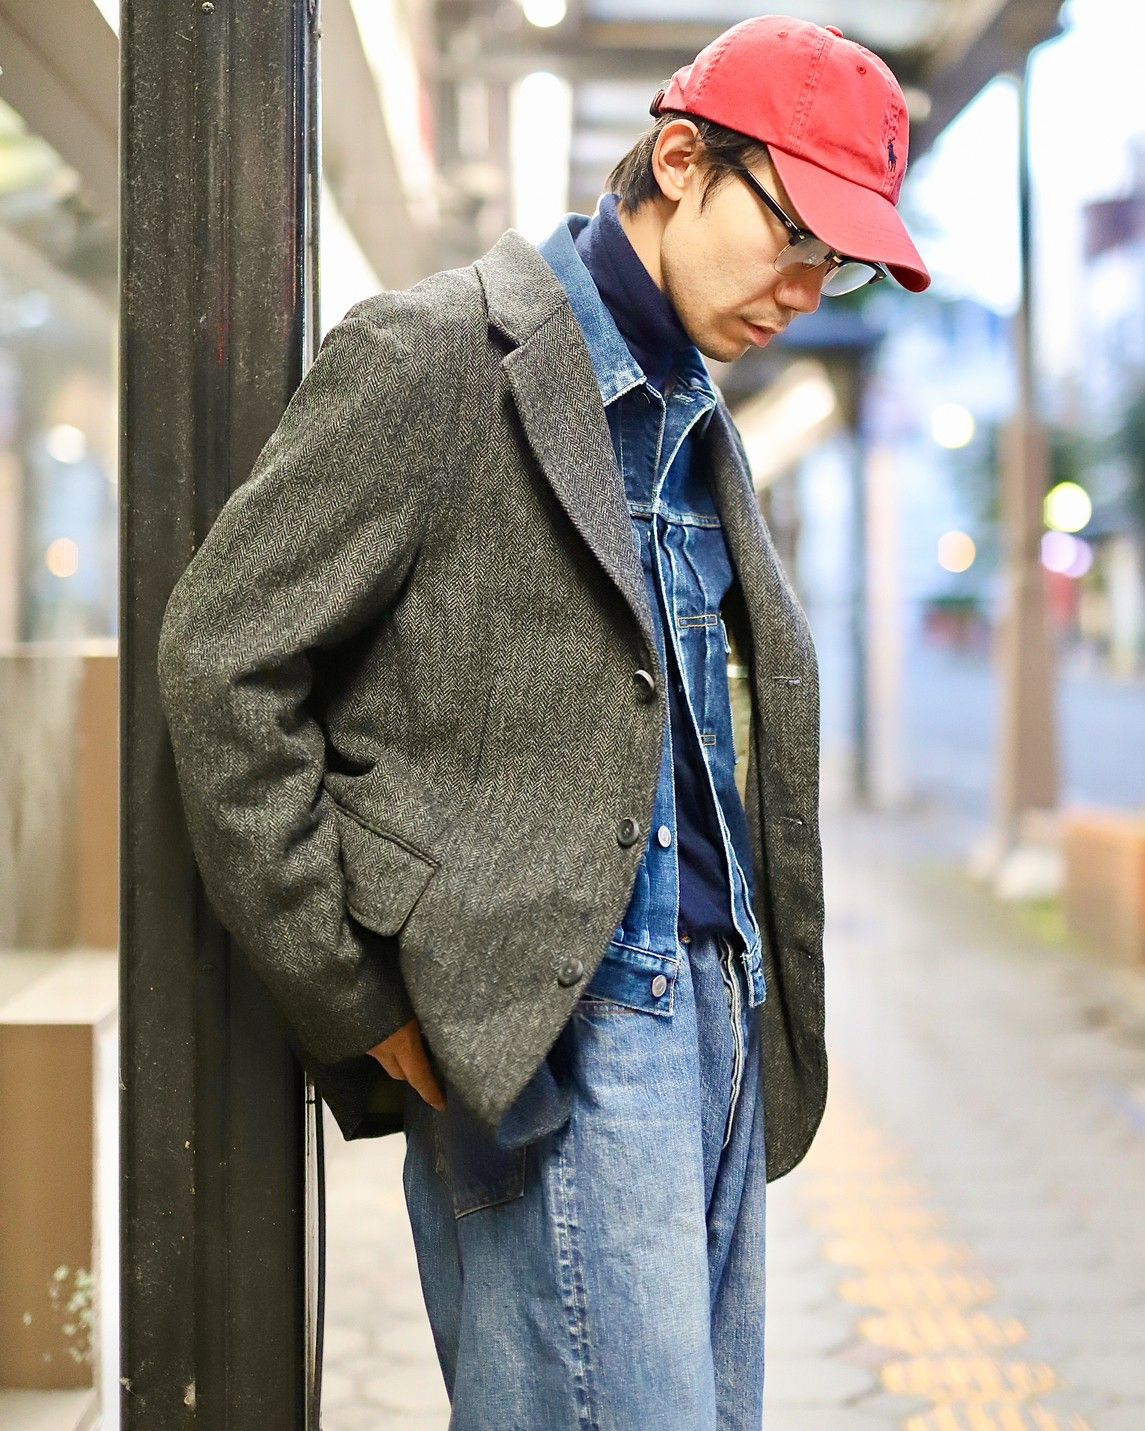 A.PRESSE - アプレッセ Tweed Tailored Jacket(23AAP-01-18H)CHARCOAL ...